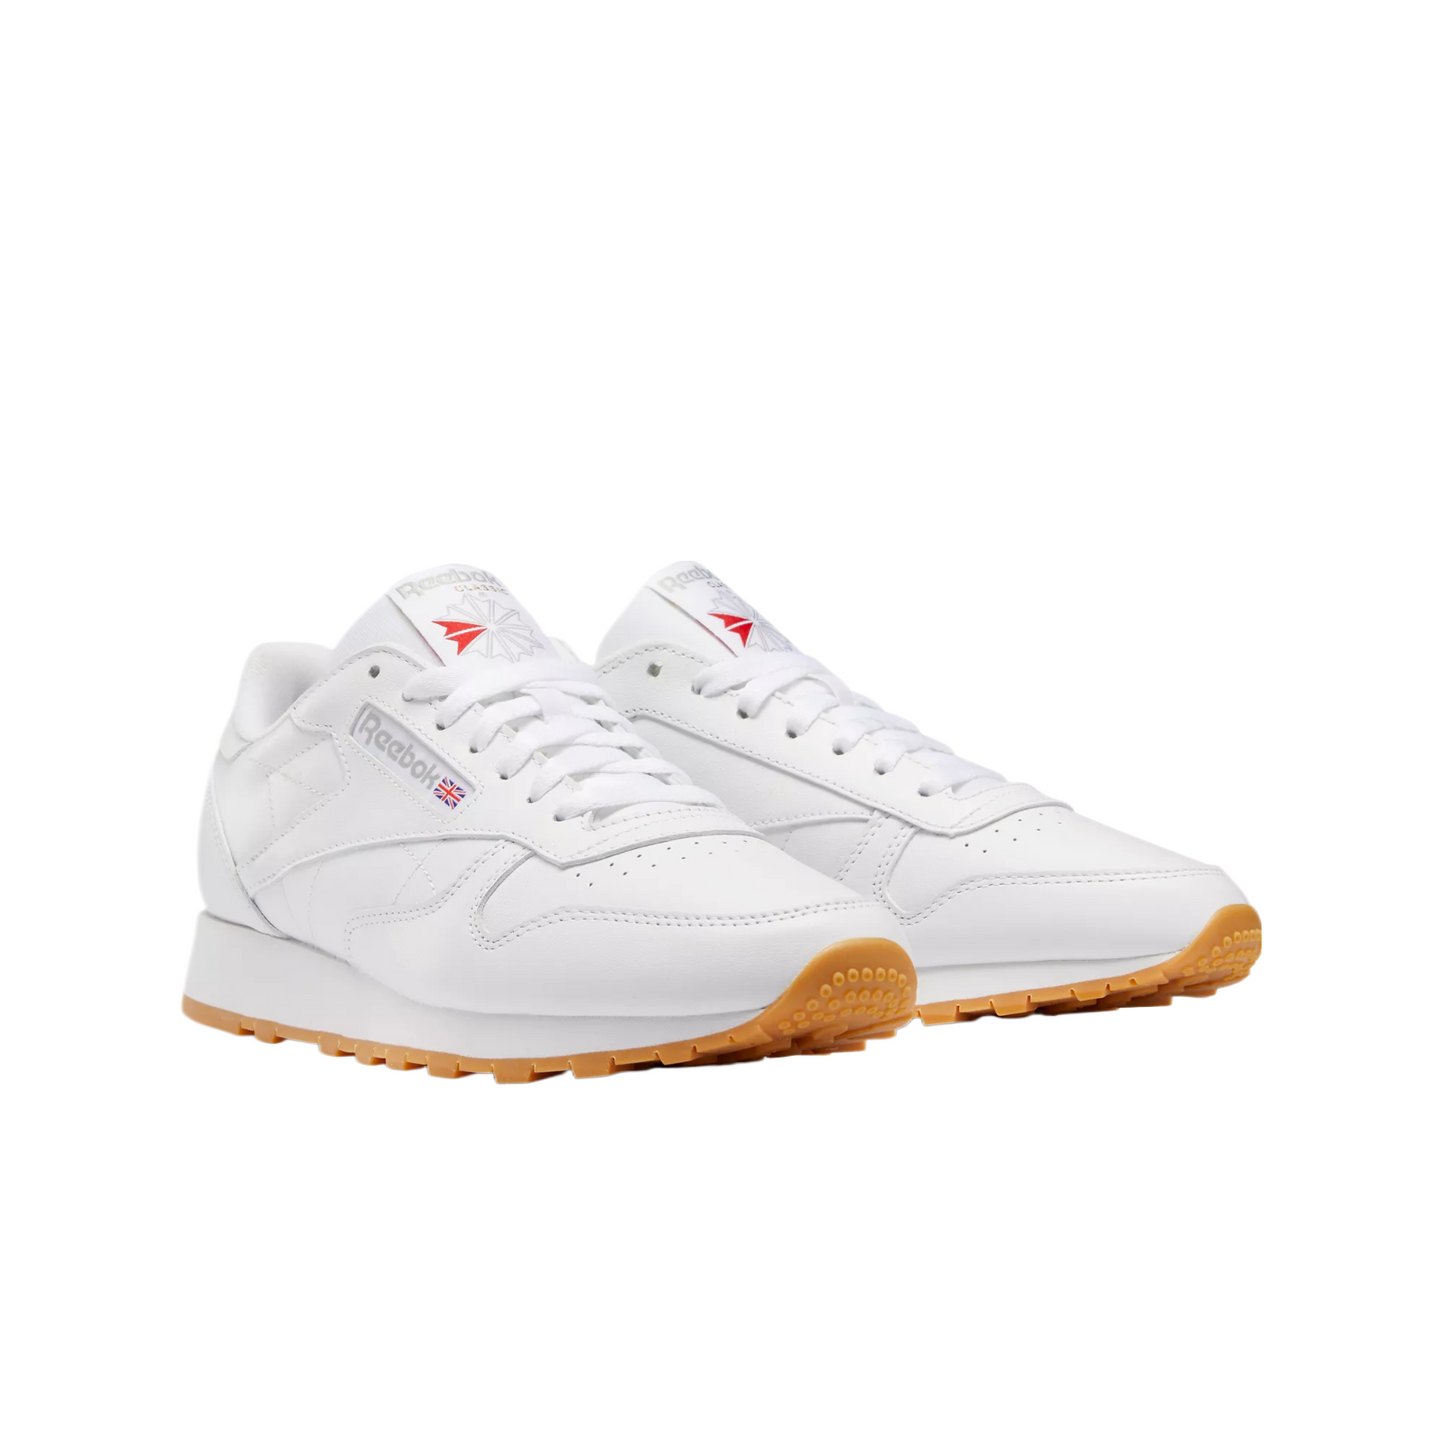 Reebok Adult Unisex Classic Leather Shoes White/Gum 49797 / GY0952